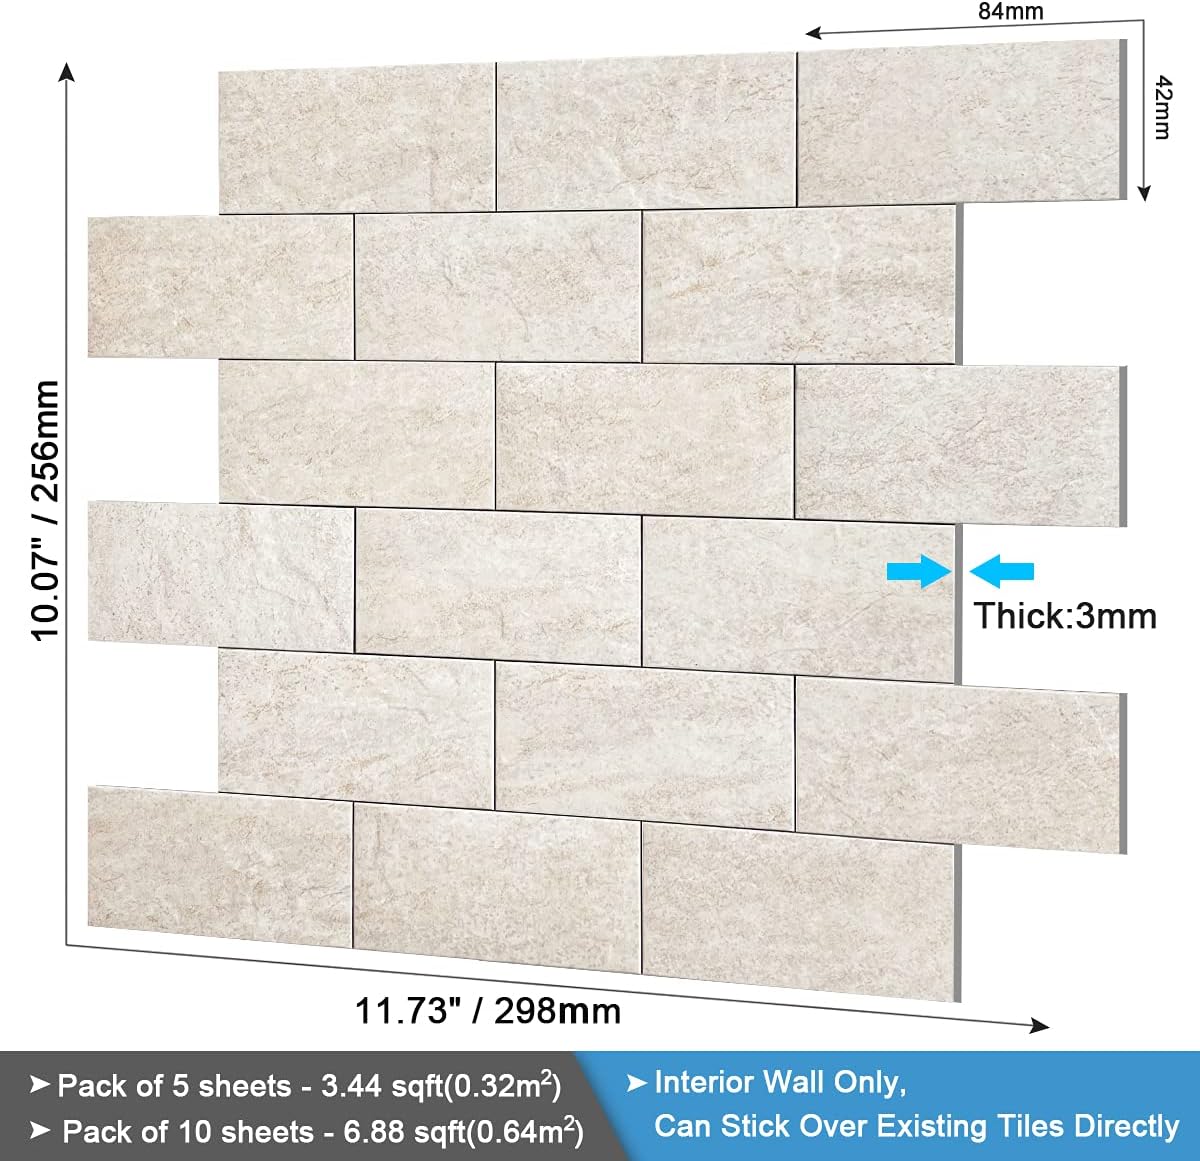 the size of wall tiles